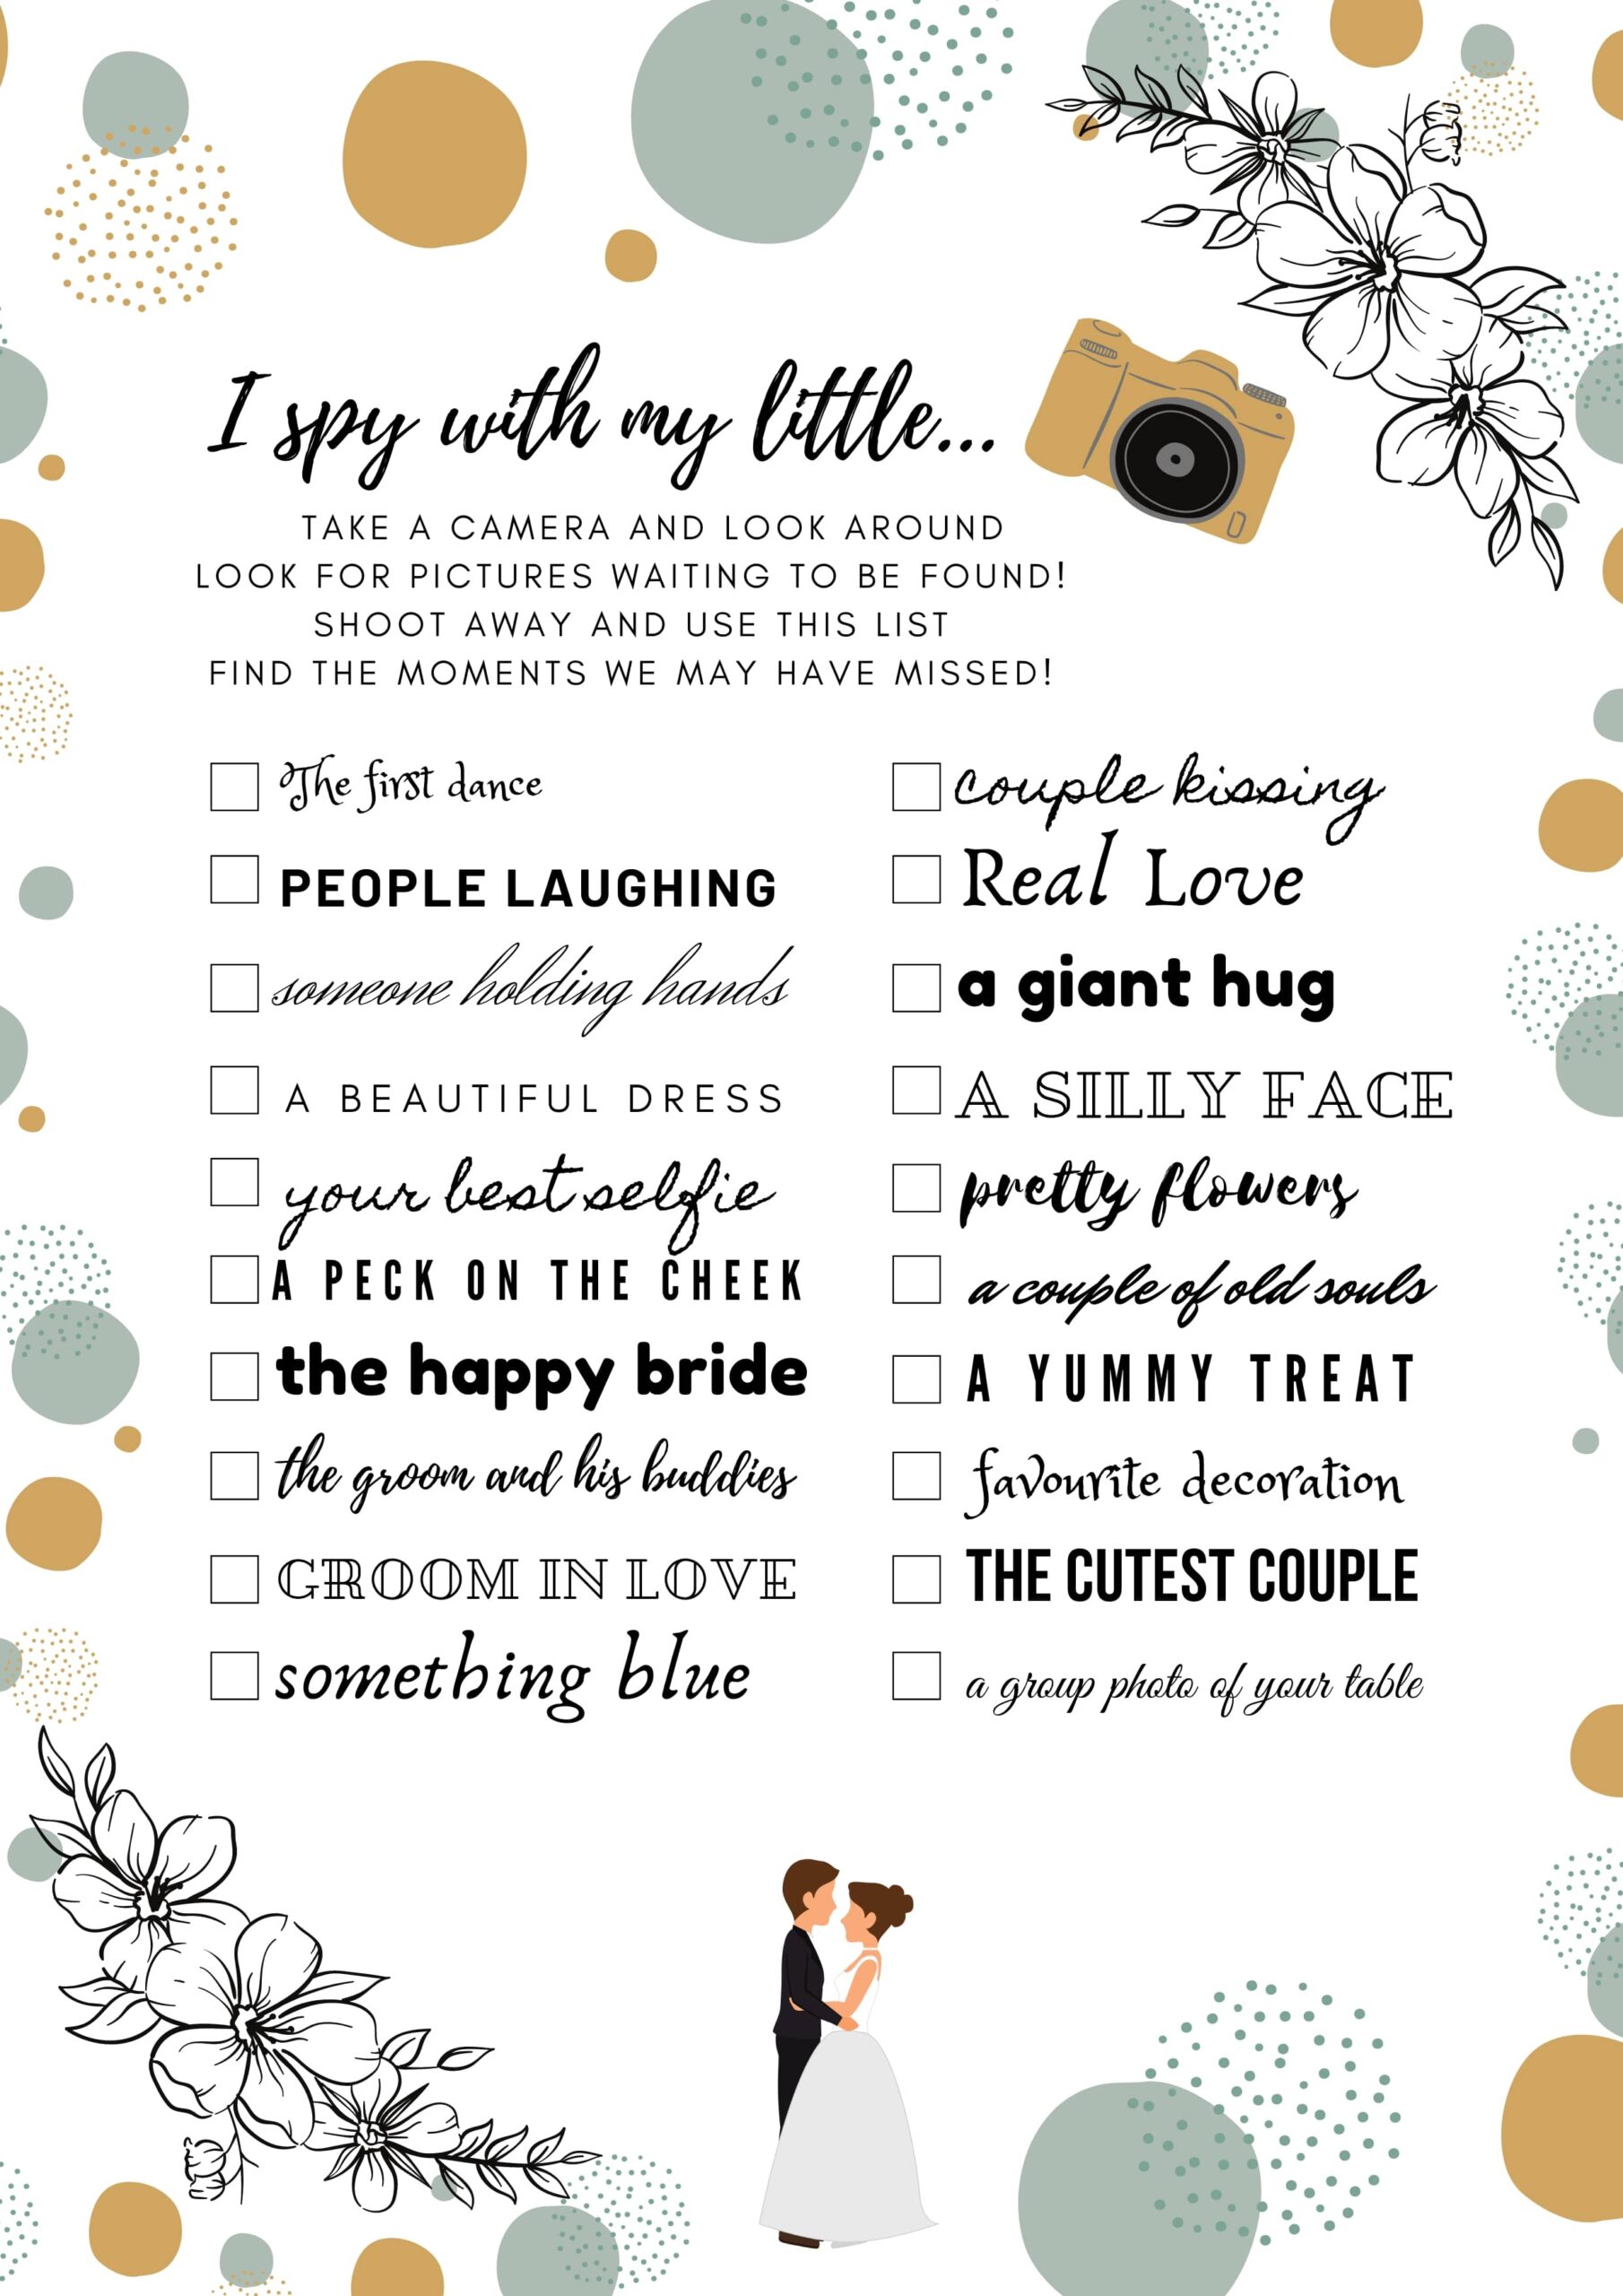 Free I spy wedding game card to download and play at the wedding